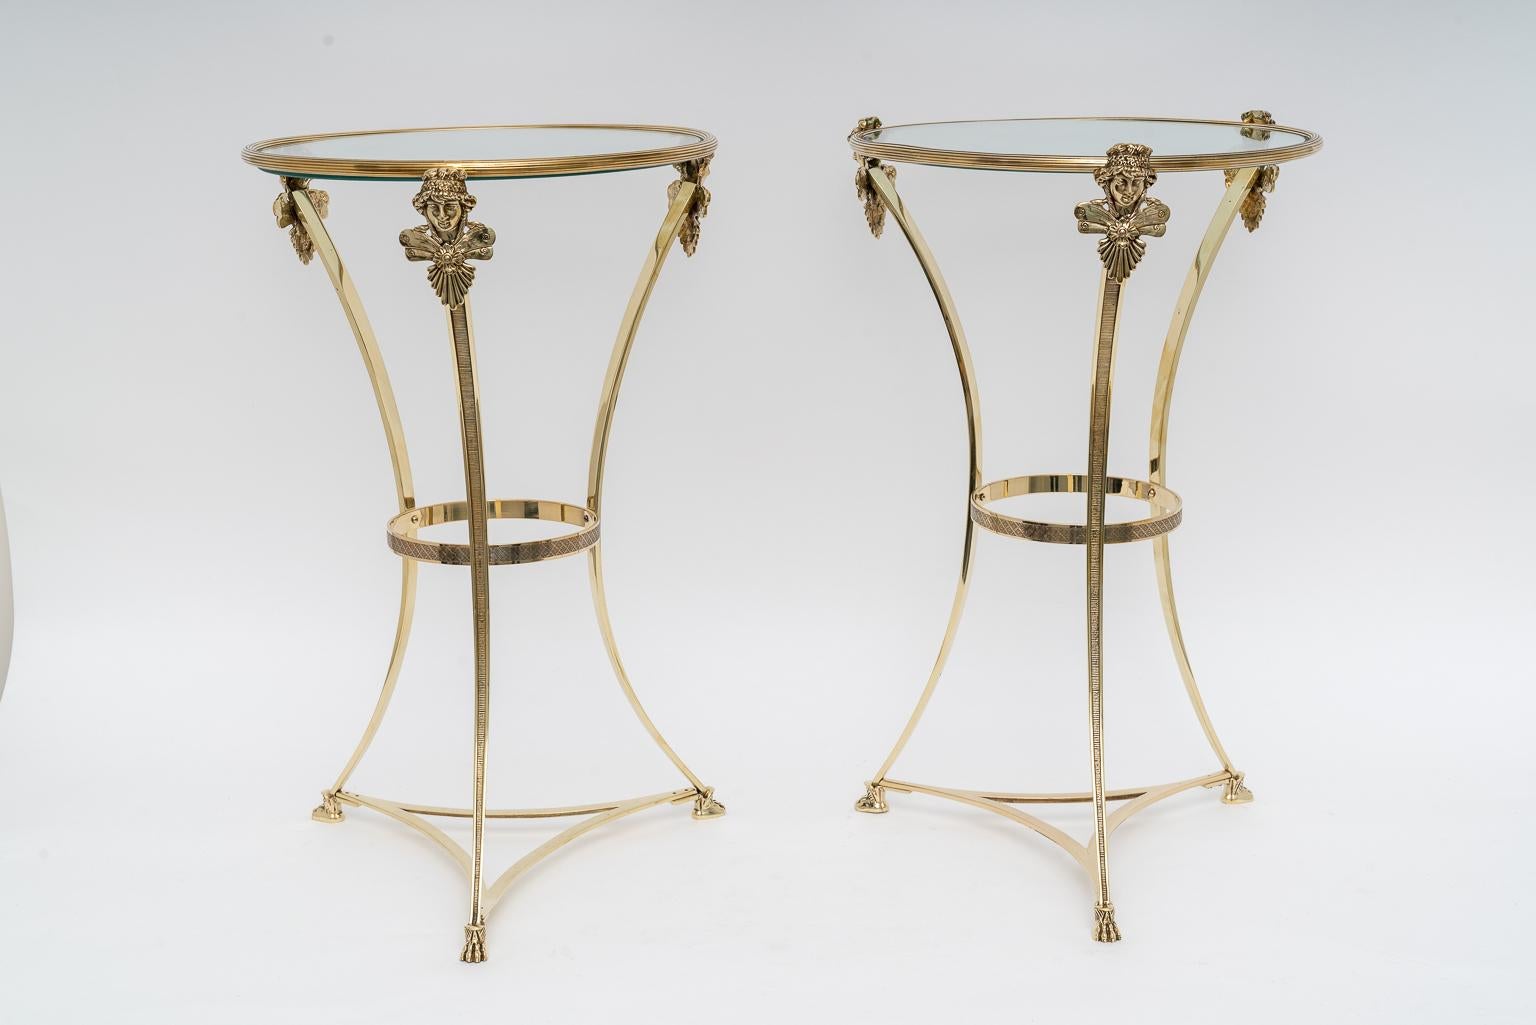 This stylish set of Maison Jansen, French Regence style brass side tables were acquired from a Palm Beach estate and date to the 1930s-1940s. 

Note: They have been professionally polished.